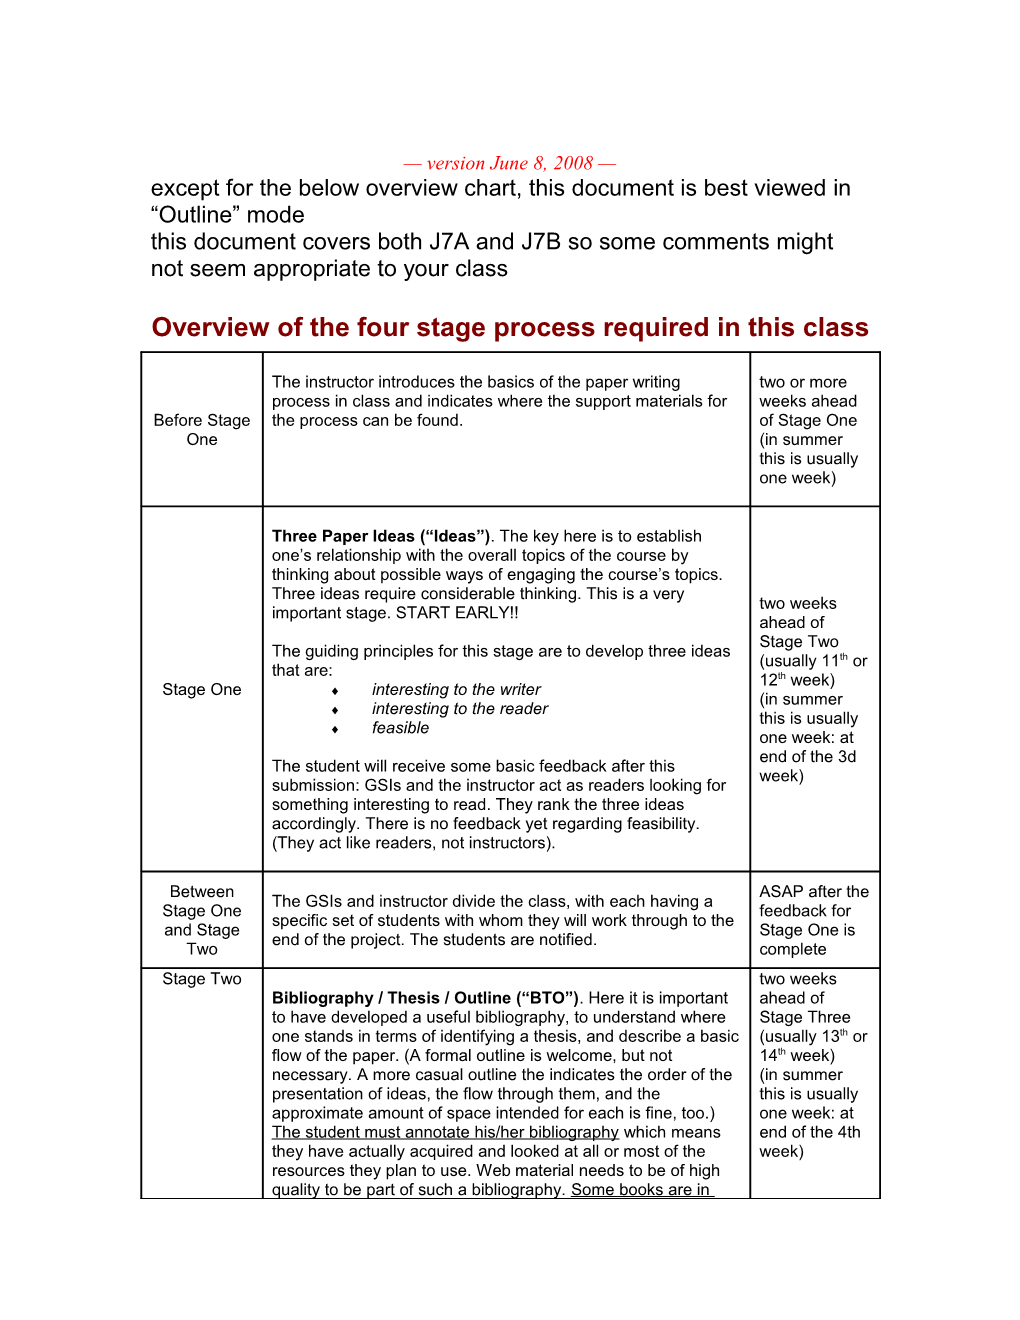 Overview of the Four Stage Process Required in This Class